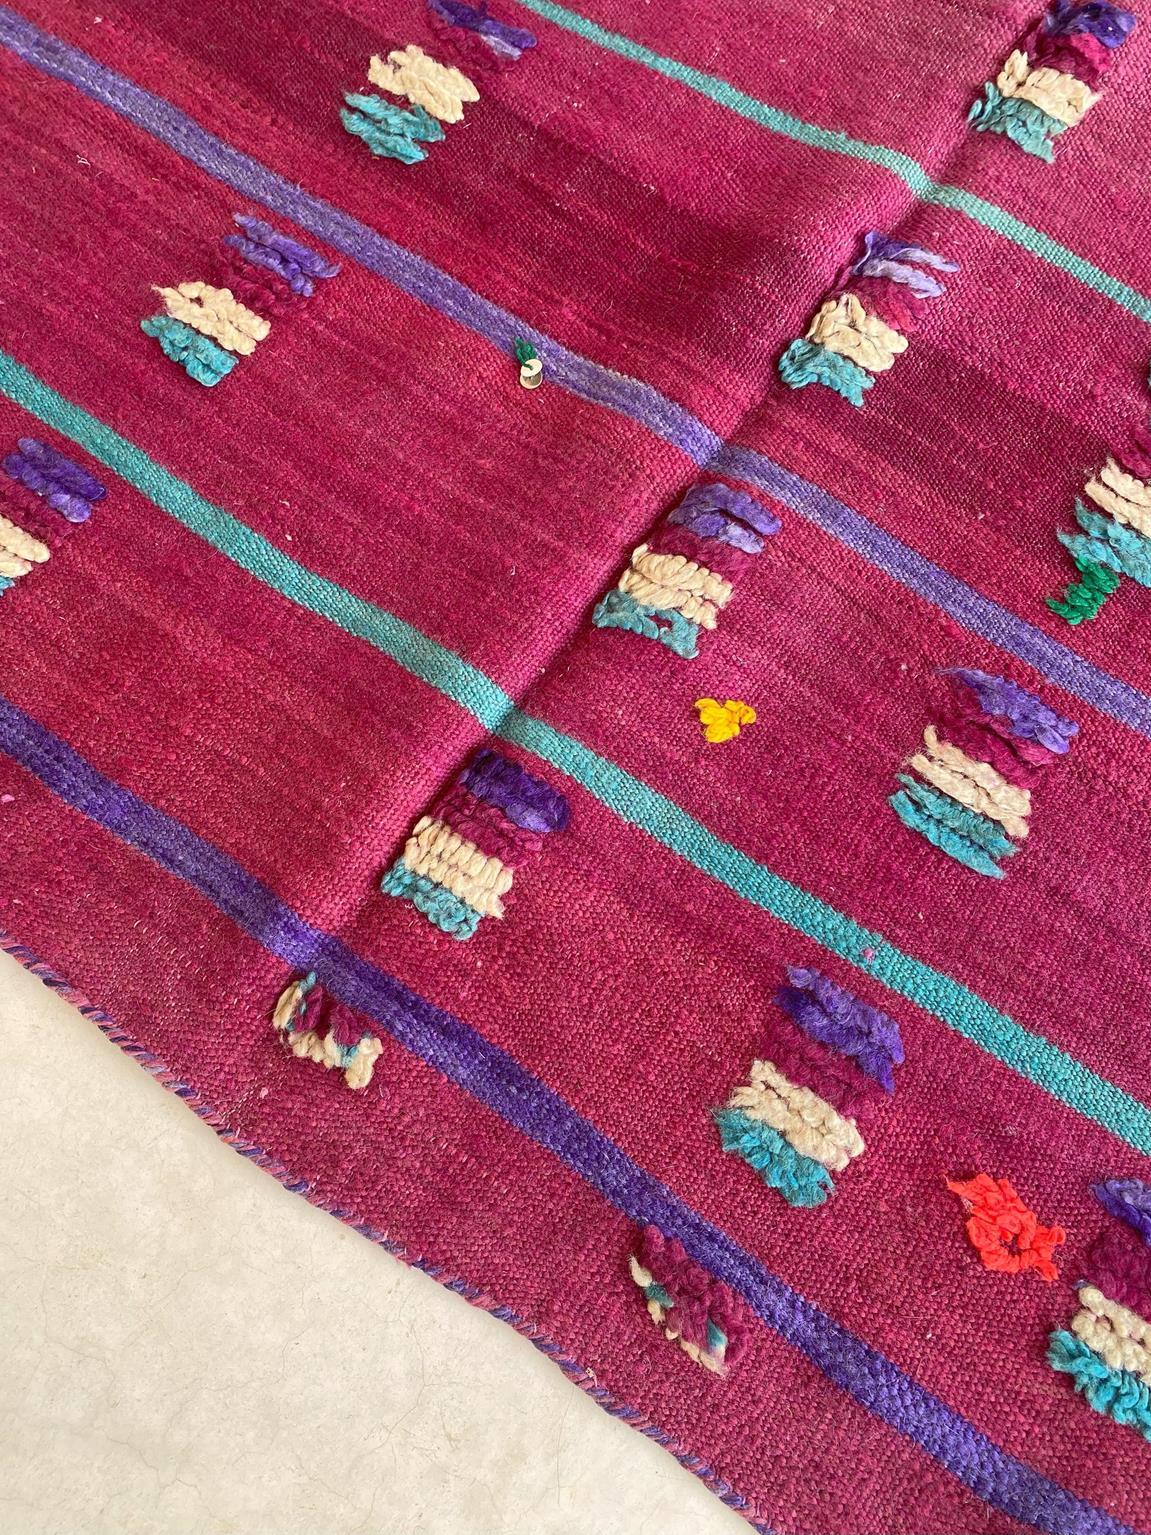 Wool Vintage Moroccan Kilim textile - Purple and yellow - 4.1x8.3feet / 127x252cm For Sale